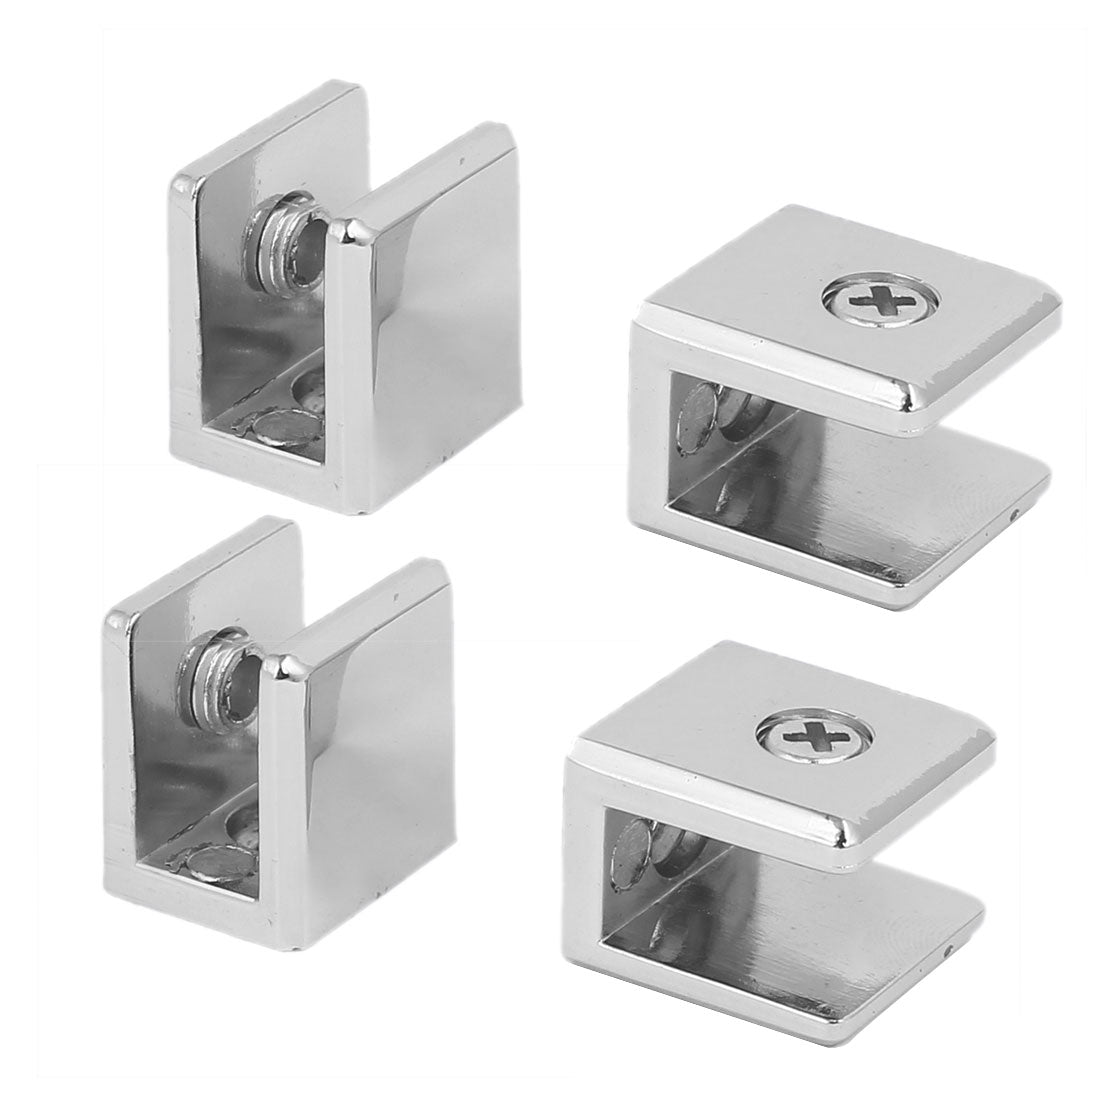 uxcell Uxcell Zinc Alloy Wall Mounted Adjustable Glass Shelf Clip Clamp Bracket Support 4pcs